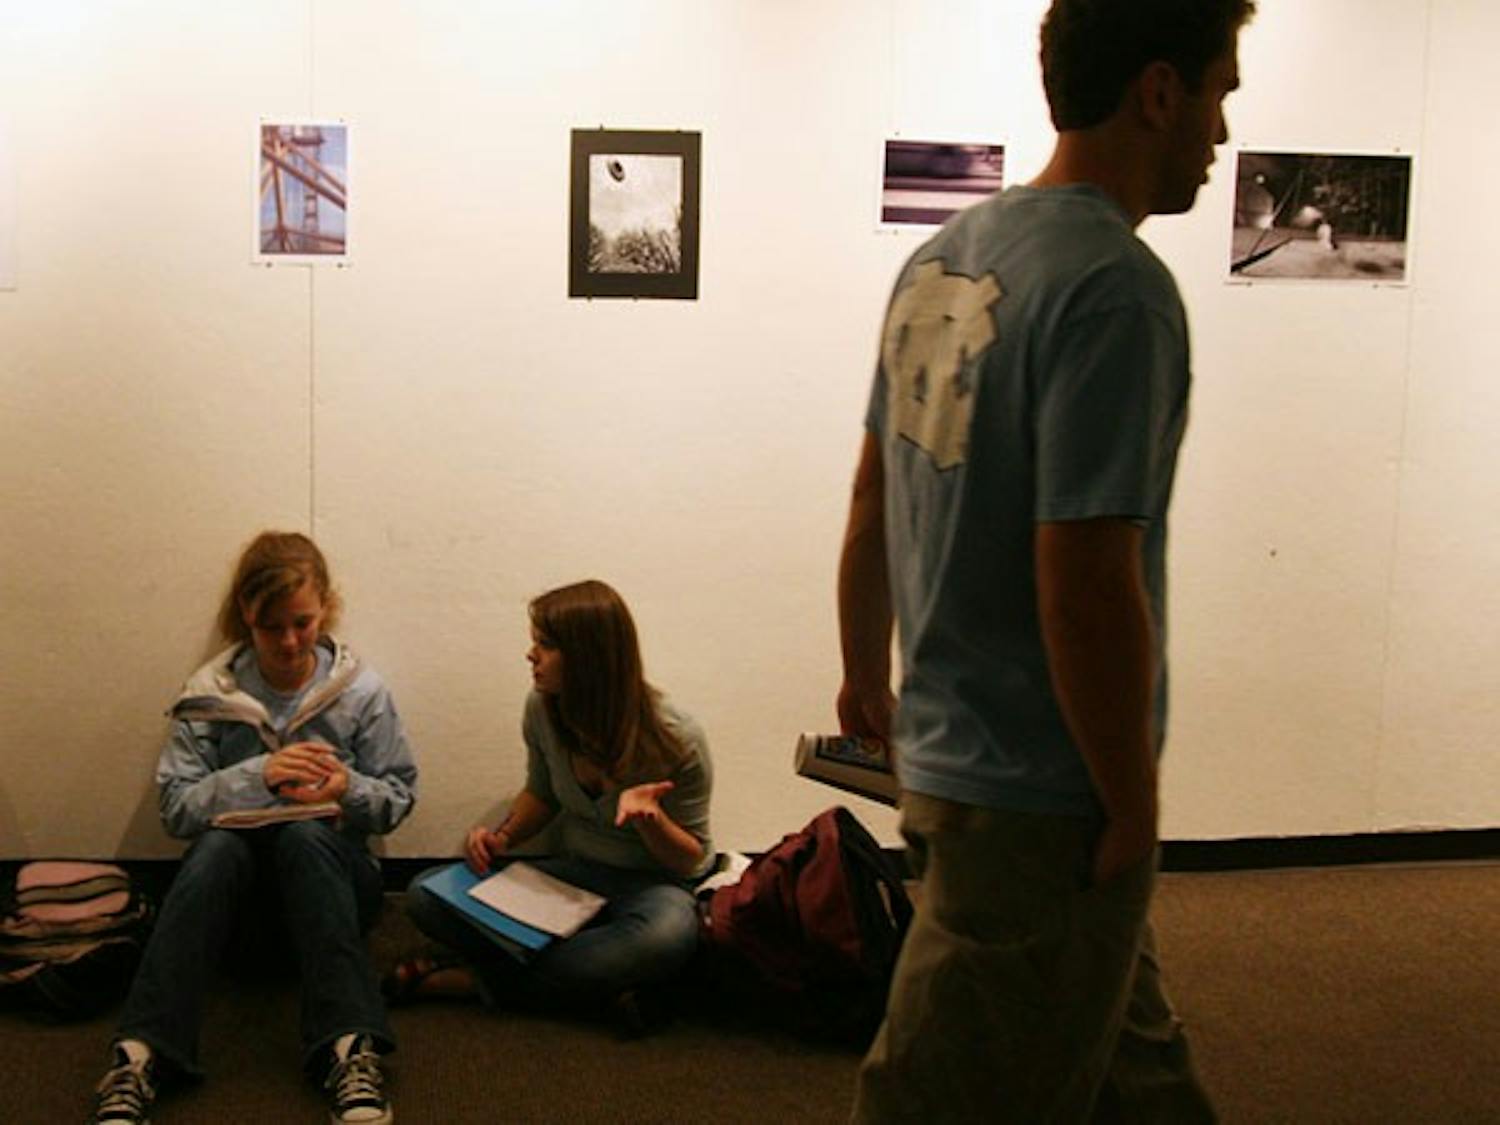 Students study Sunday night under the current art exhibit in the Student Union gallery. DTH/Jessey Dearing